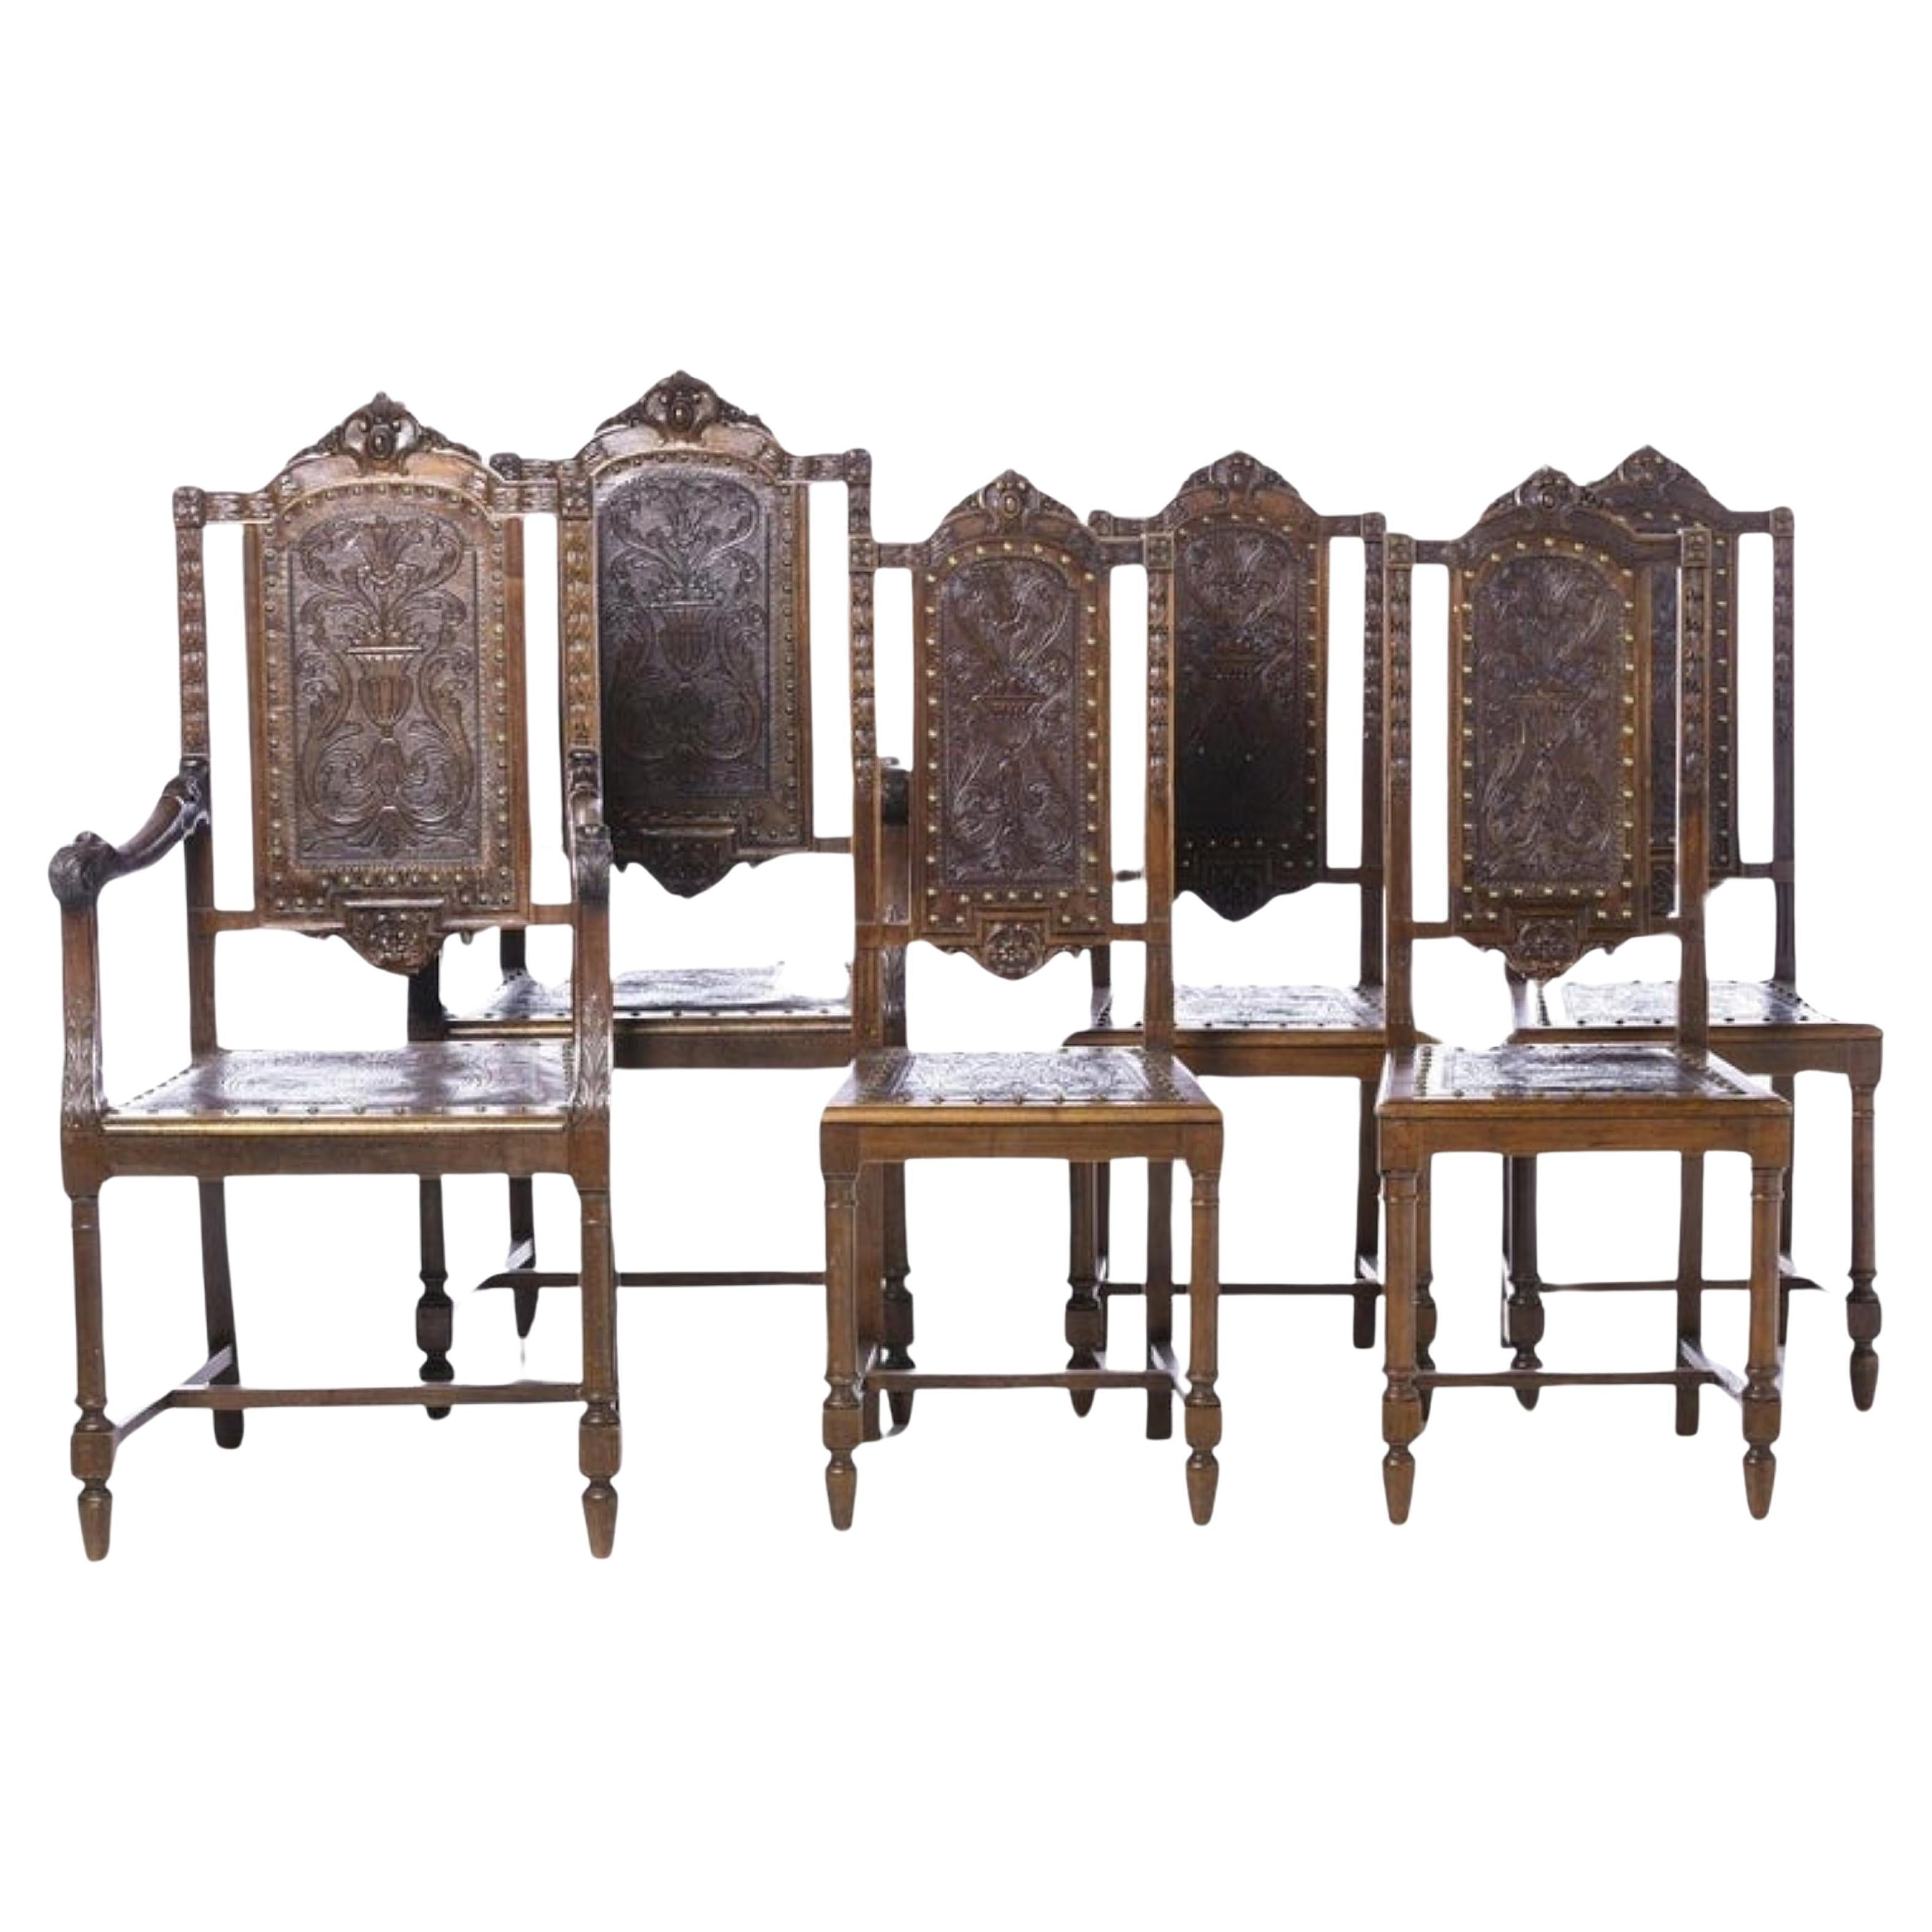 THREE PORTUGUESE ARMCHAIRS AND SIX CHAIRS 19th century  For Sale